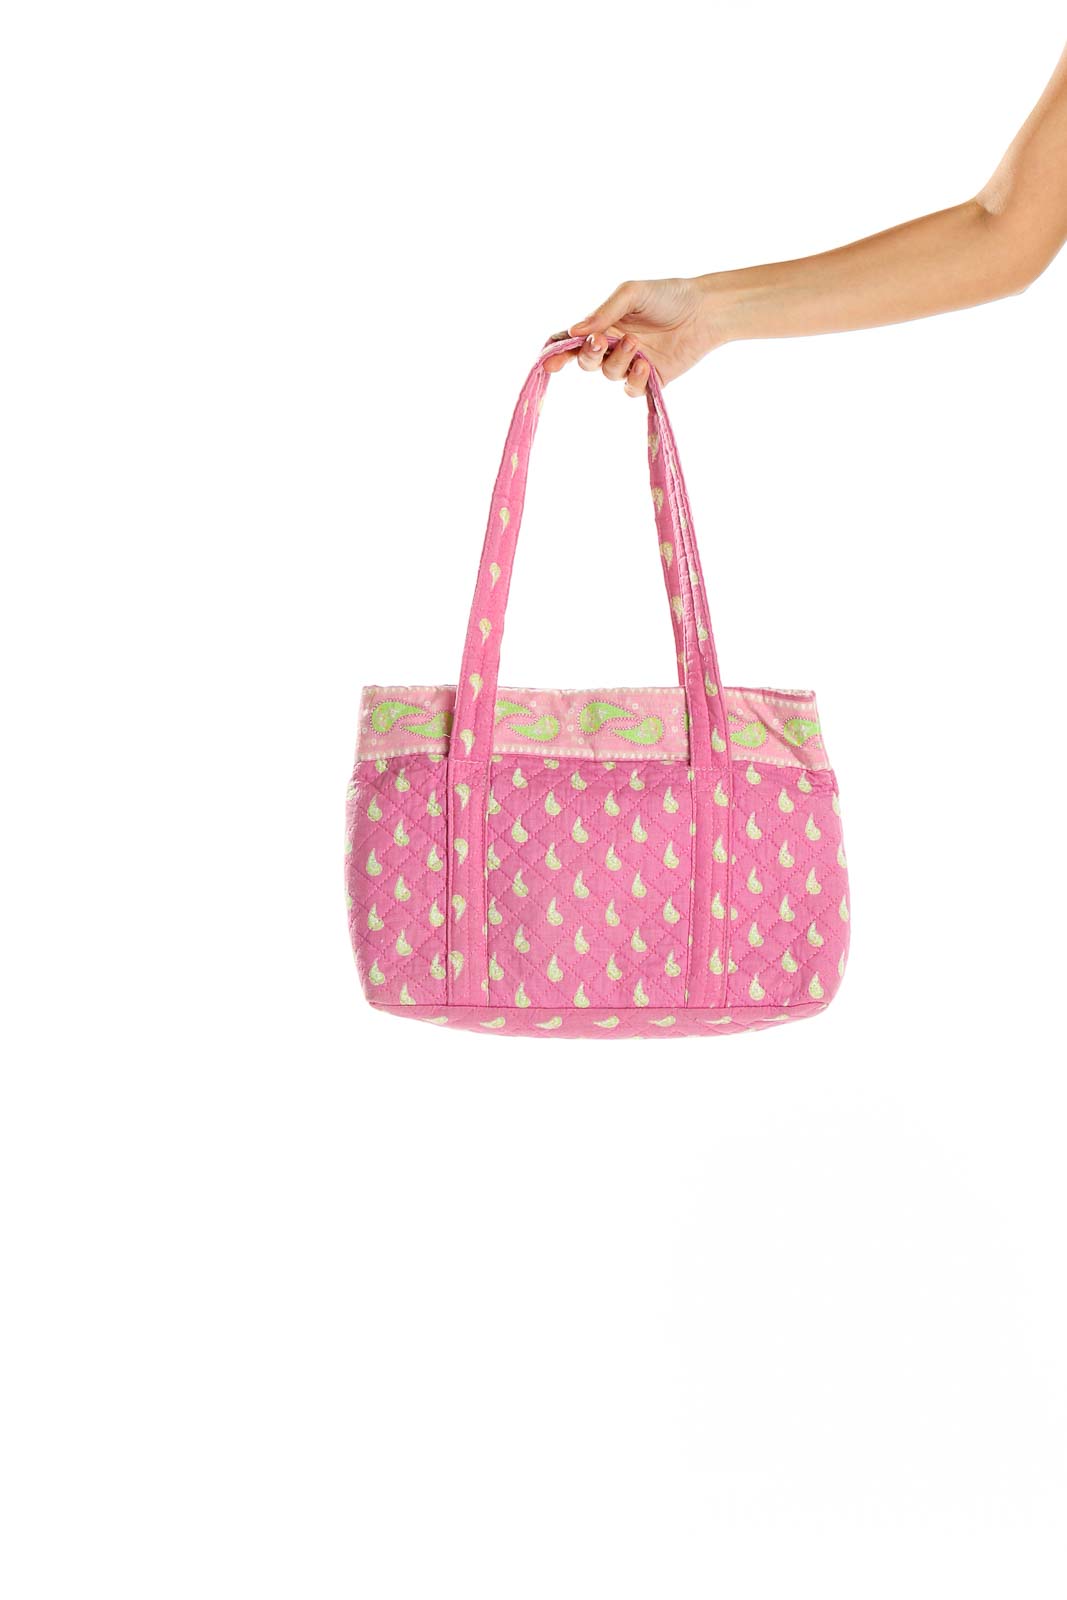 Pink Paisley Quilted Tote Bag Front